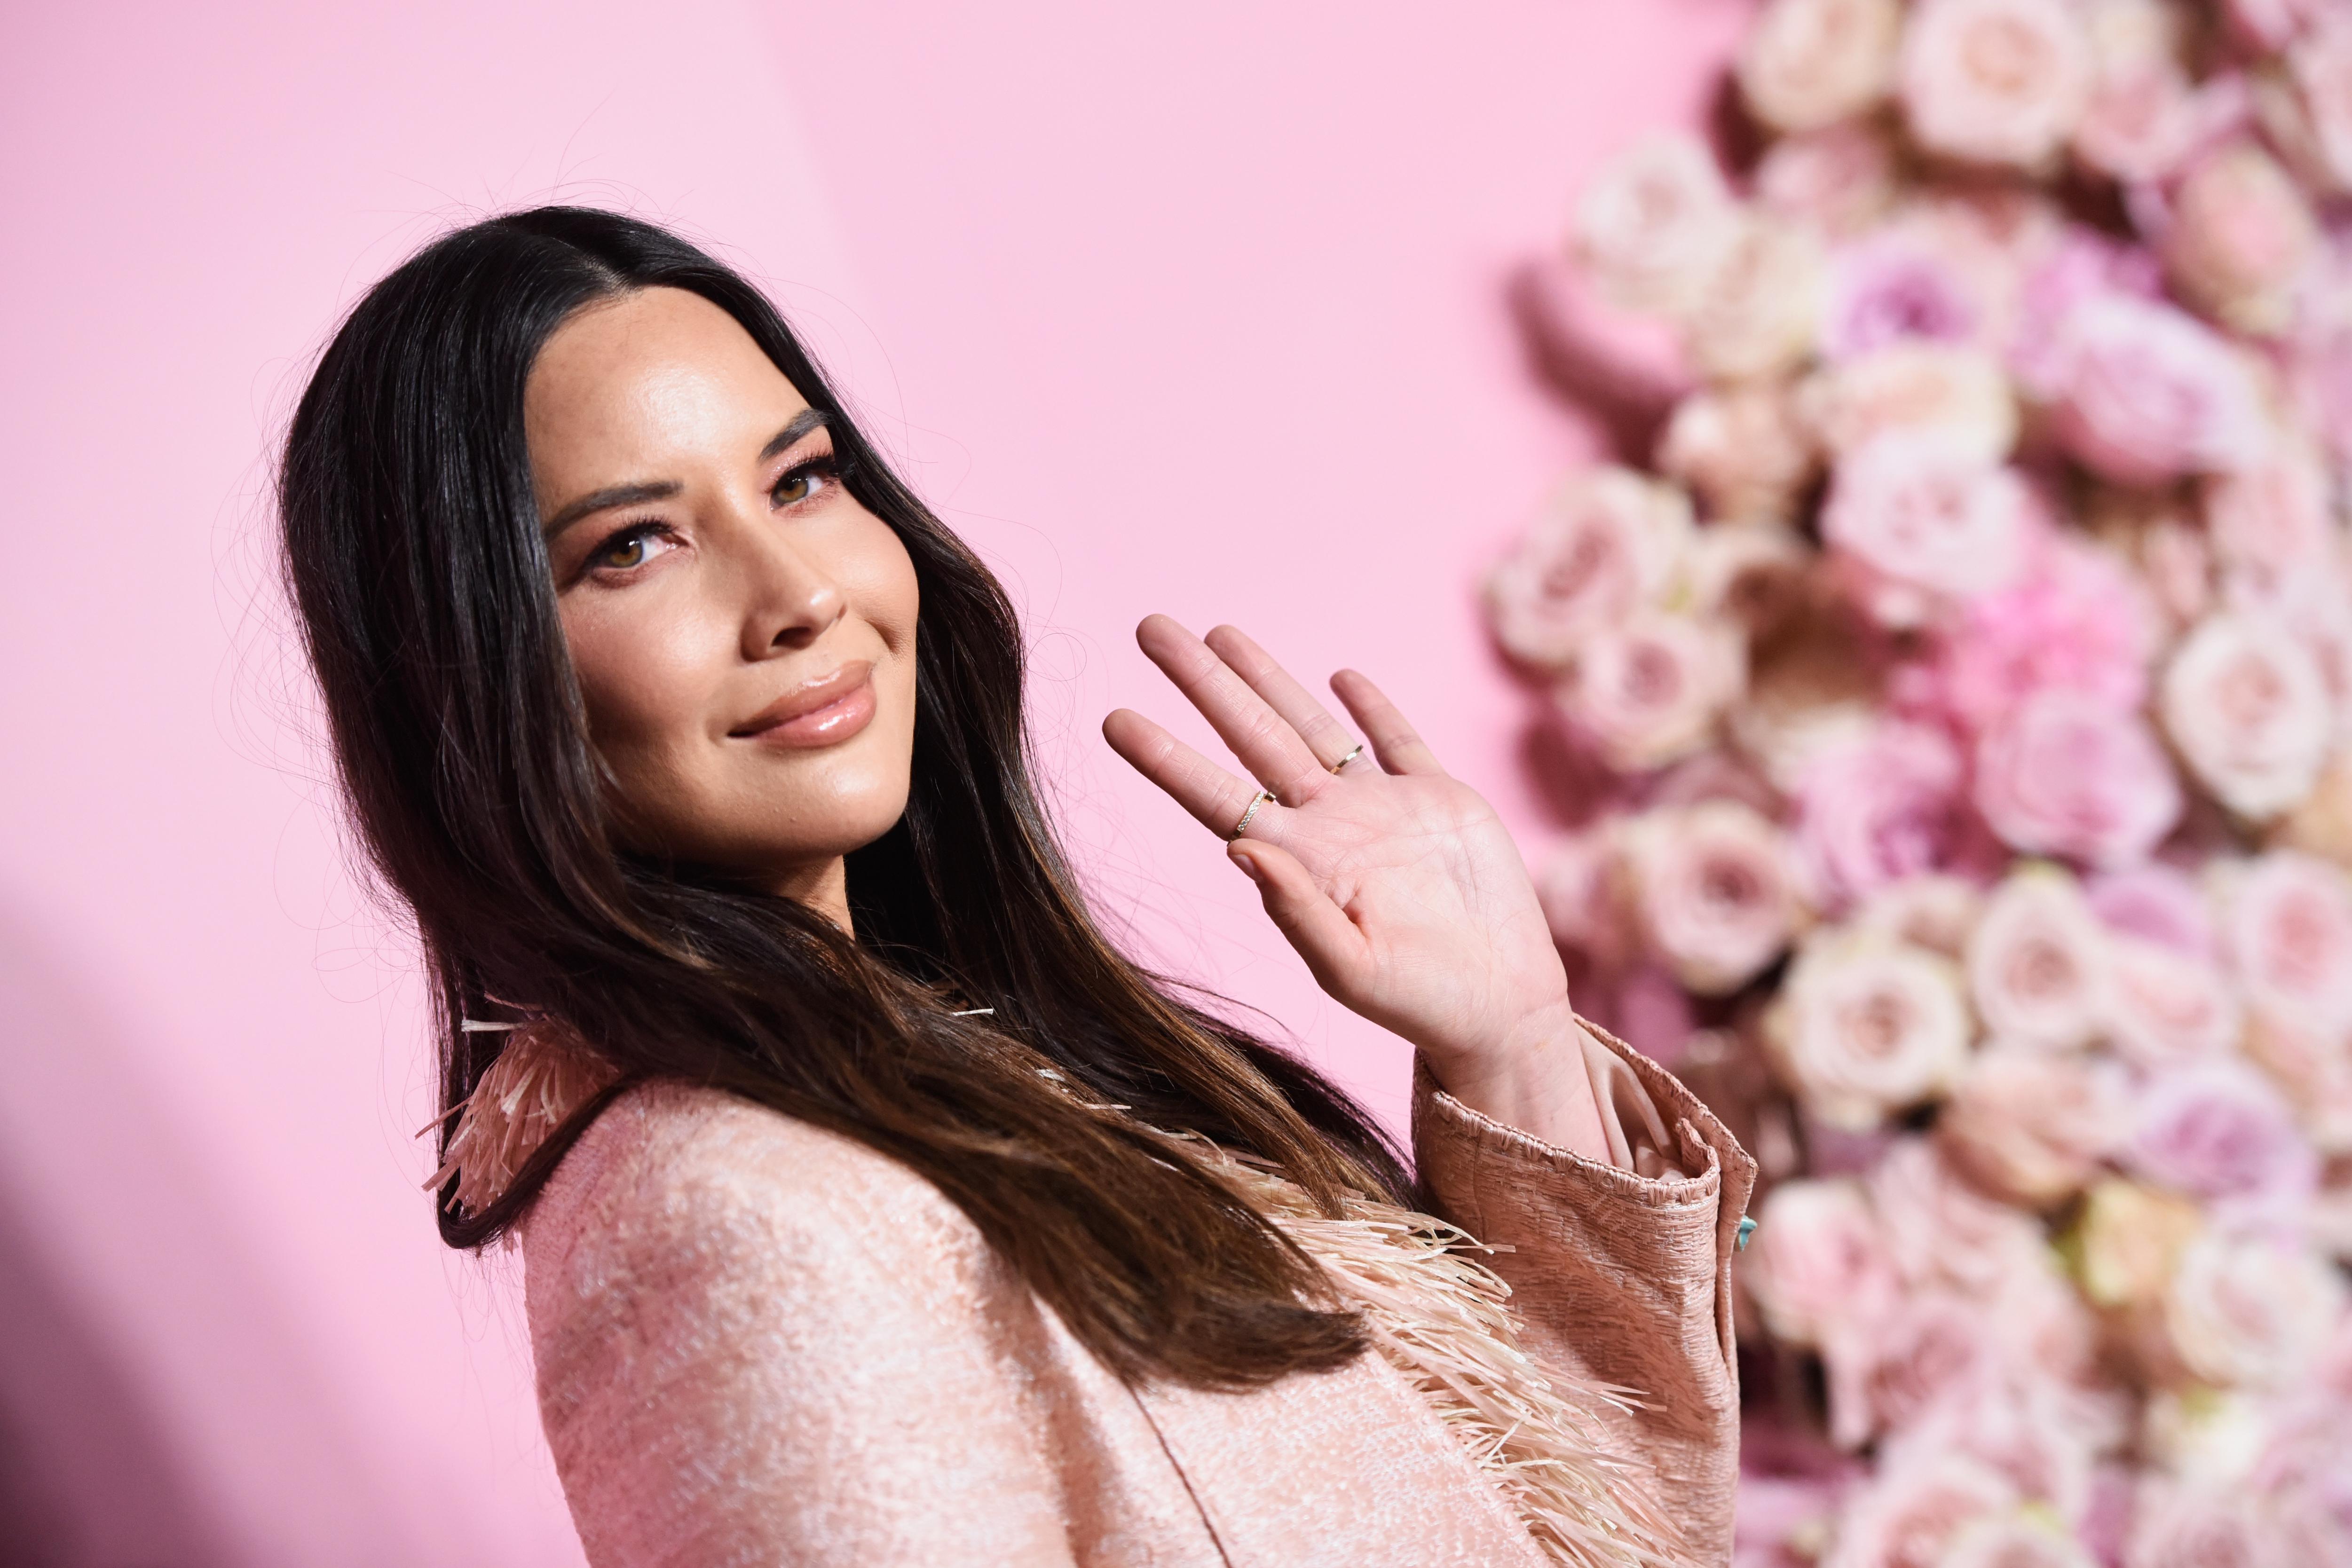 Olivia Munn from the chest up, waving, in a skewed-frame picture with pink background.